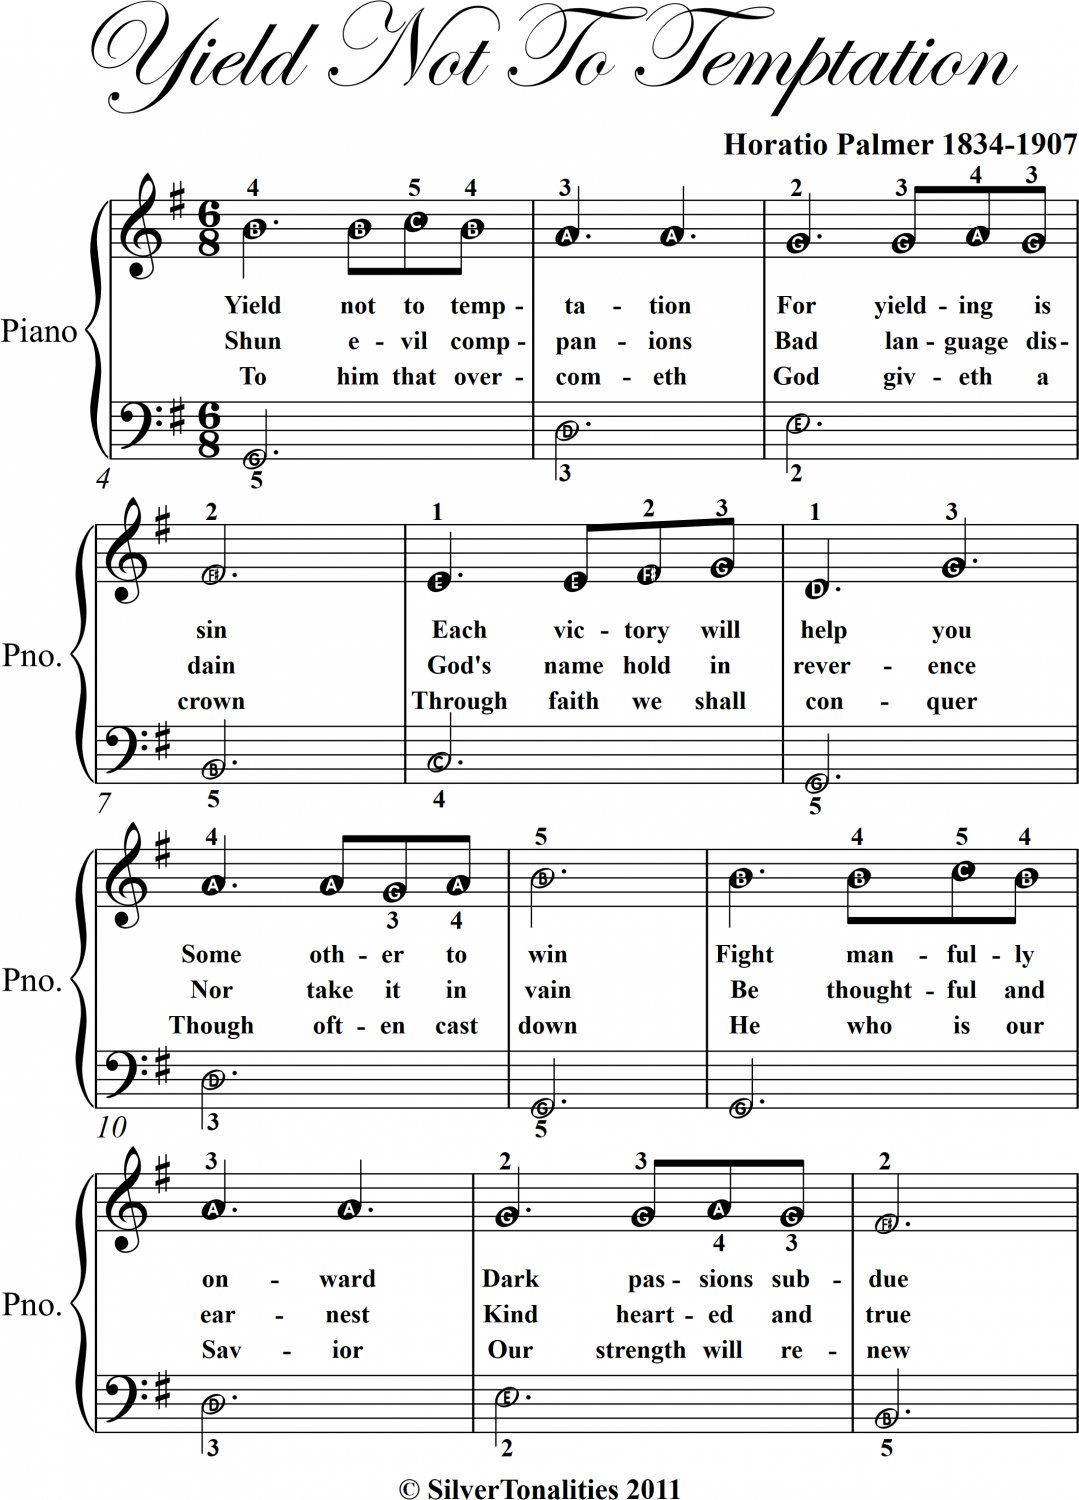 Yield Not to Temptation Easy Piano Sheet Music